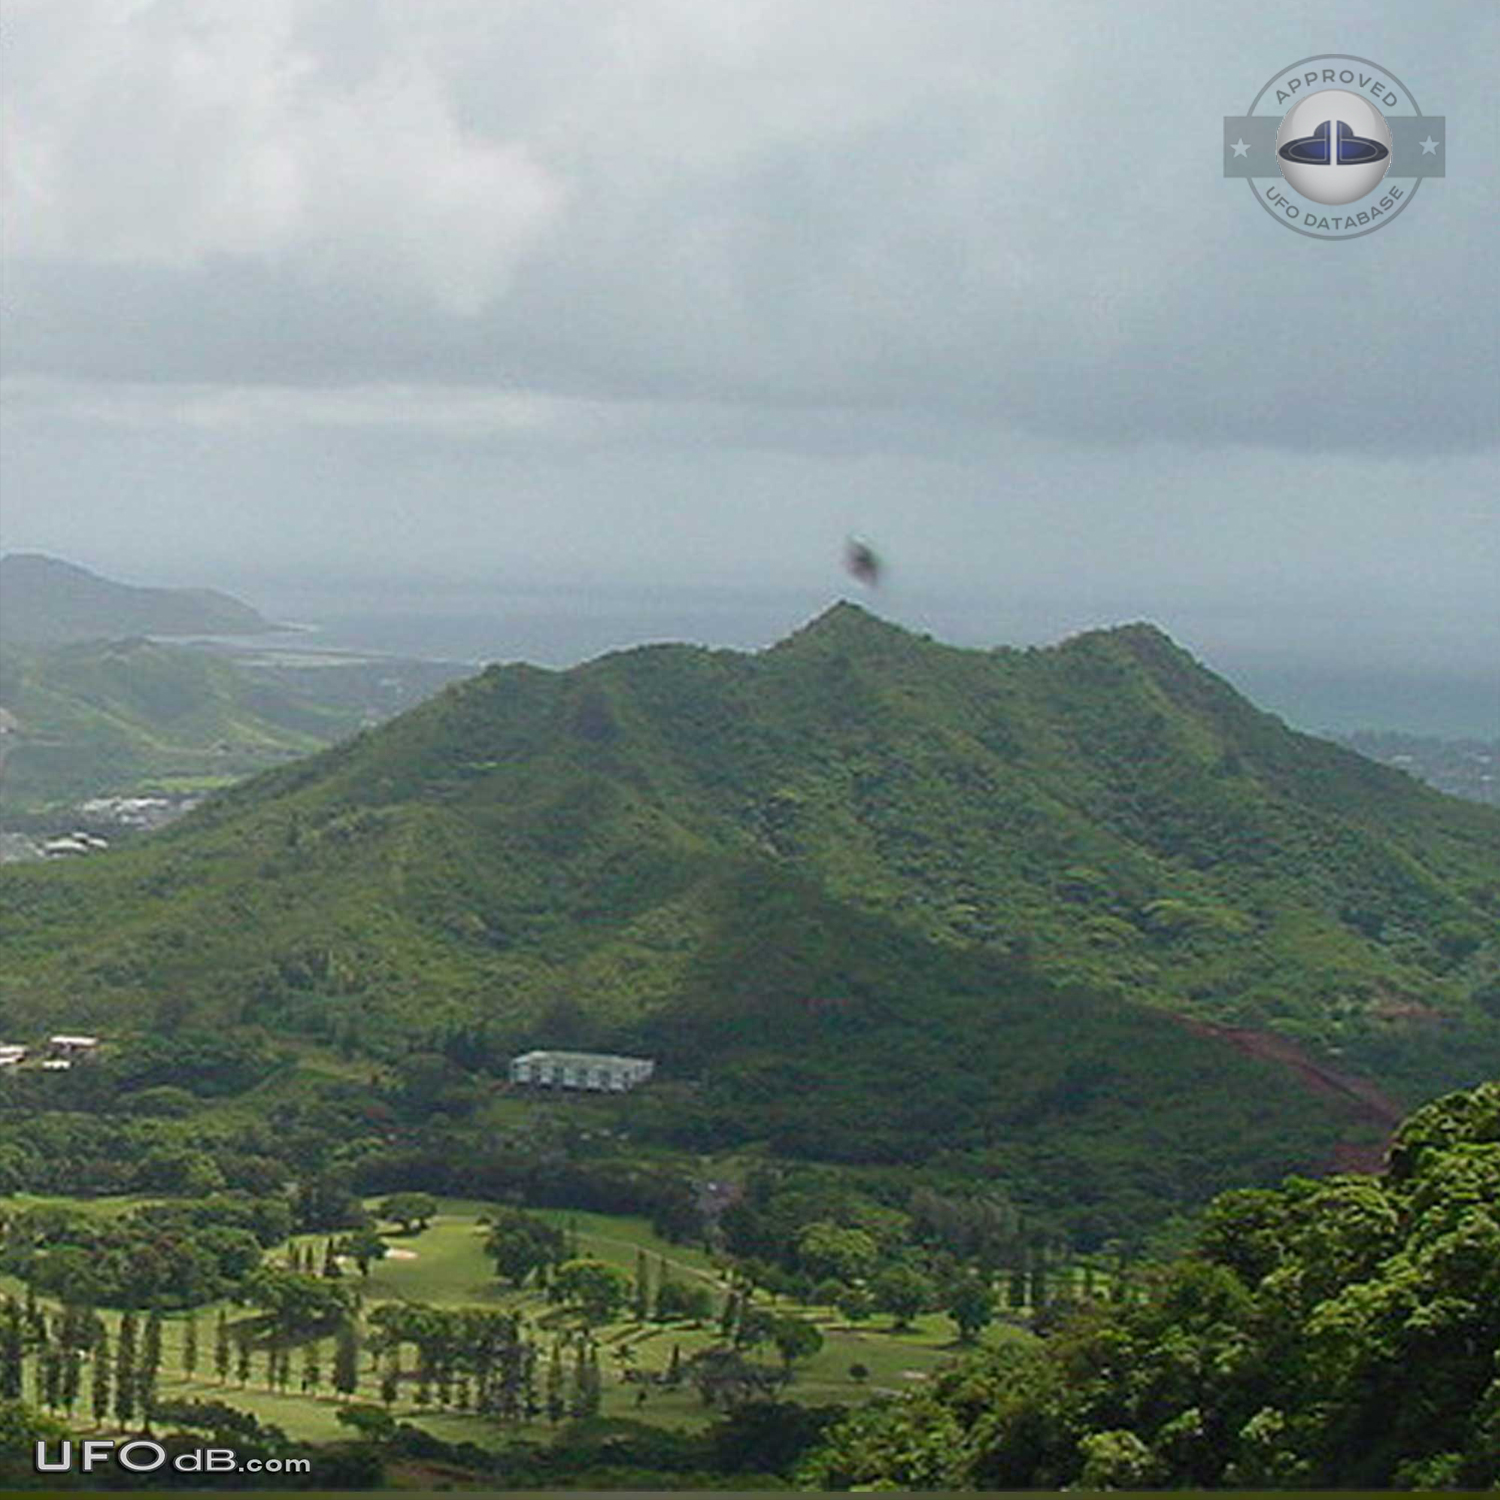 UFO caught on picture over mountain in Oahu, Hawaii in June 2004 UFO Picture #430-1